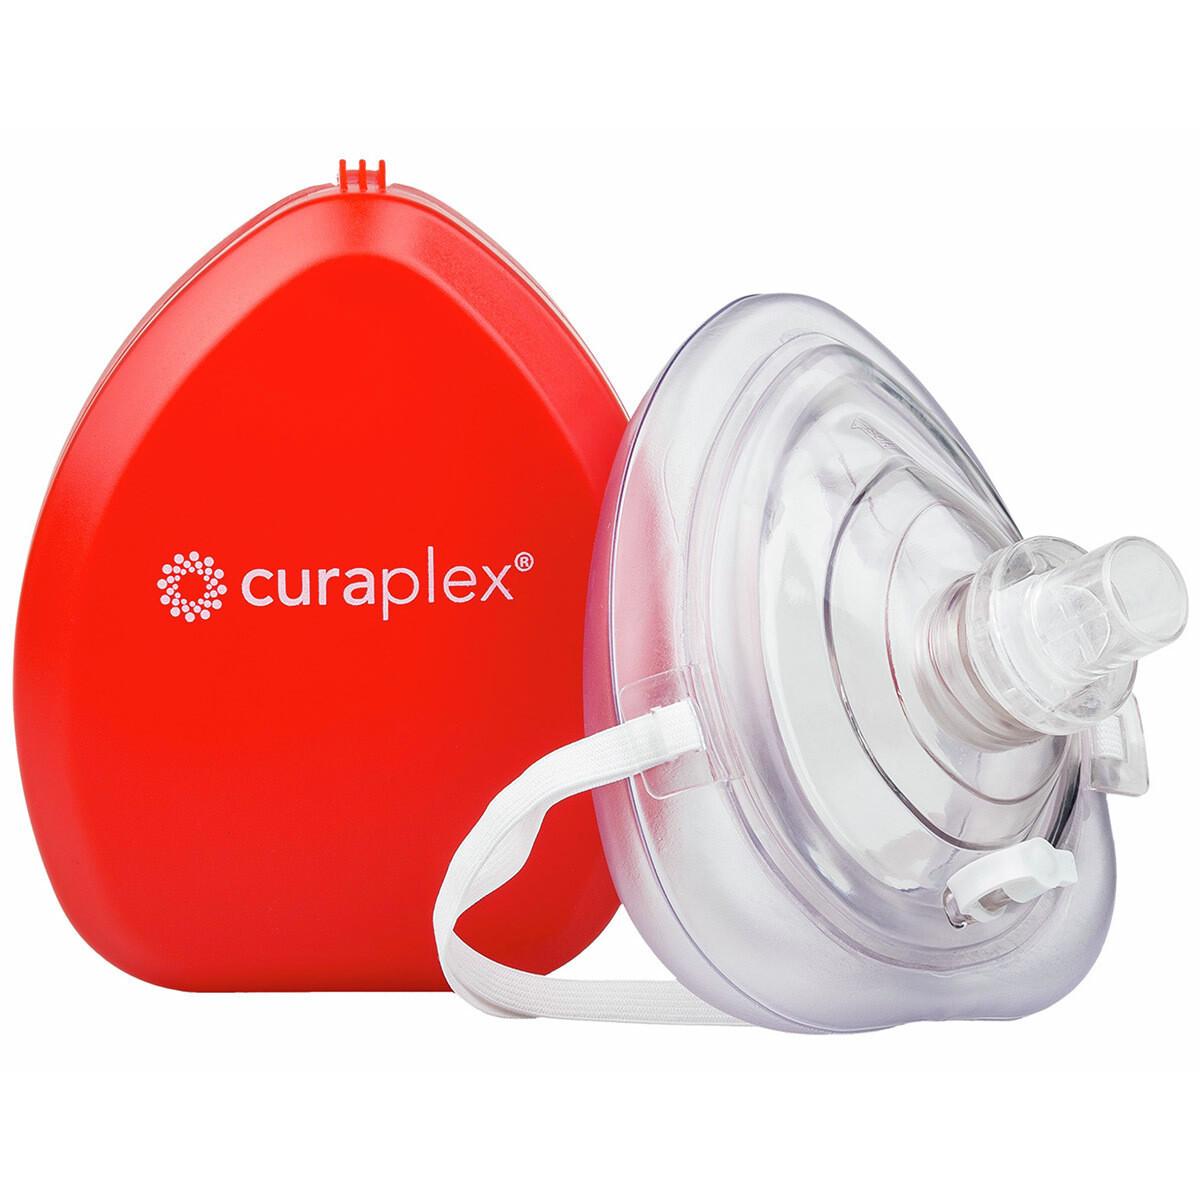 CPR Mask with Case (Orange)